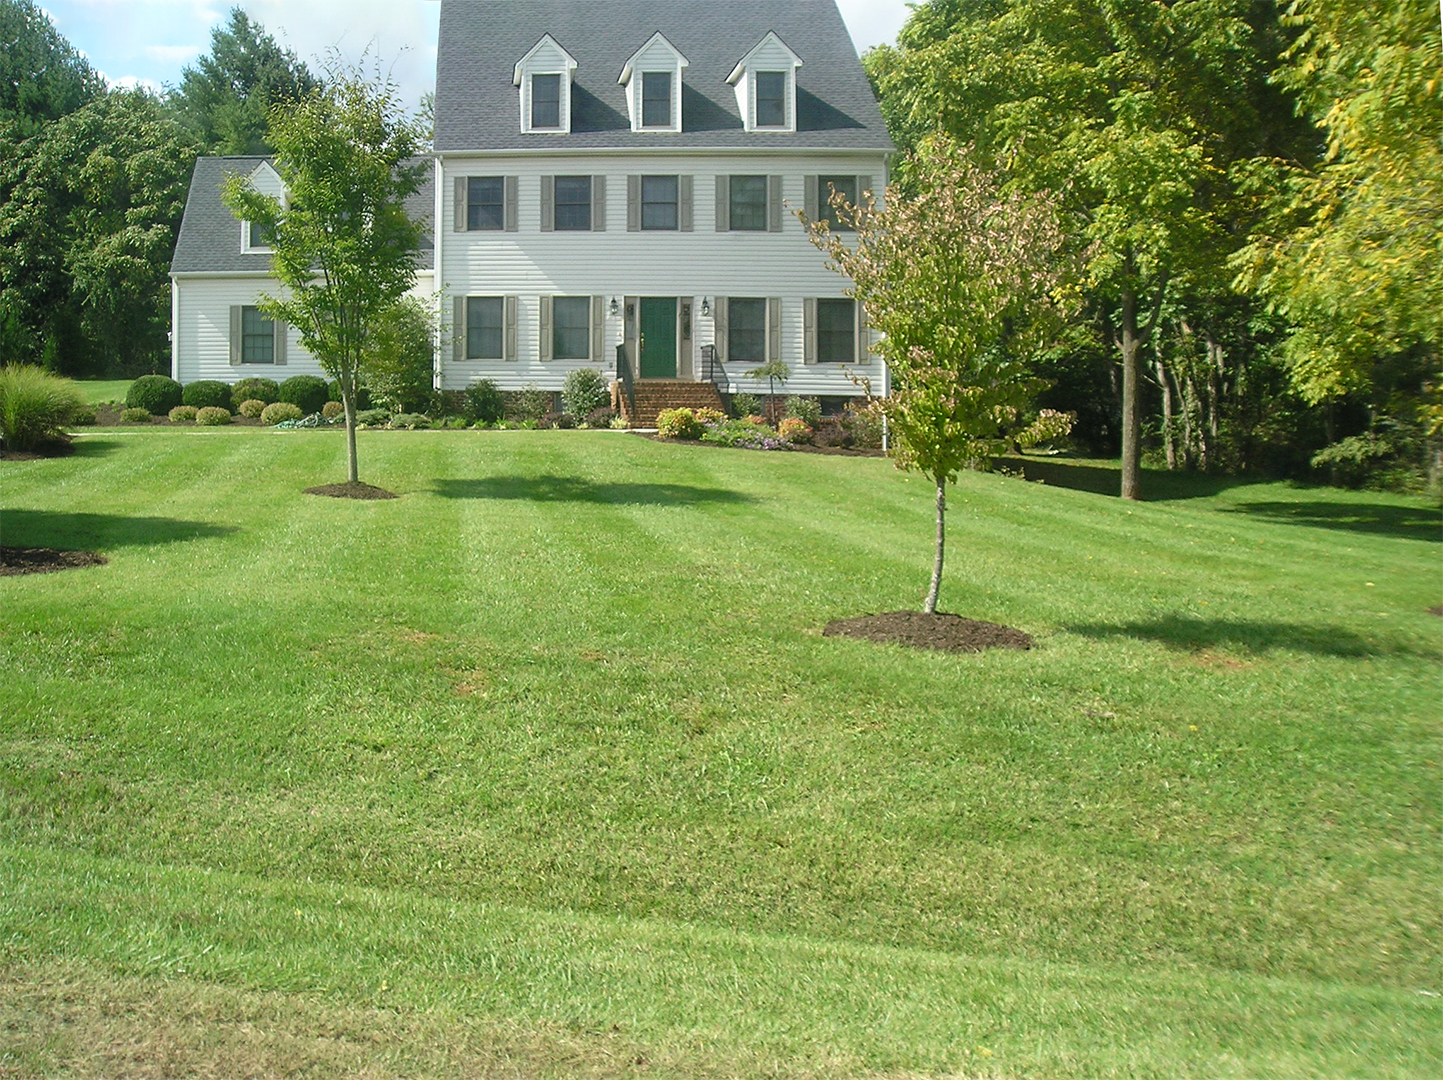 Beautiful home and lawn with lawncare by ADC Lawncare & Bobcat Service